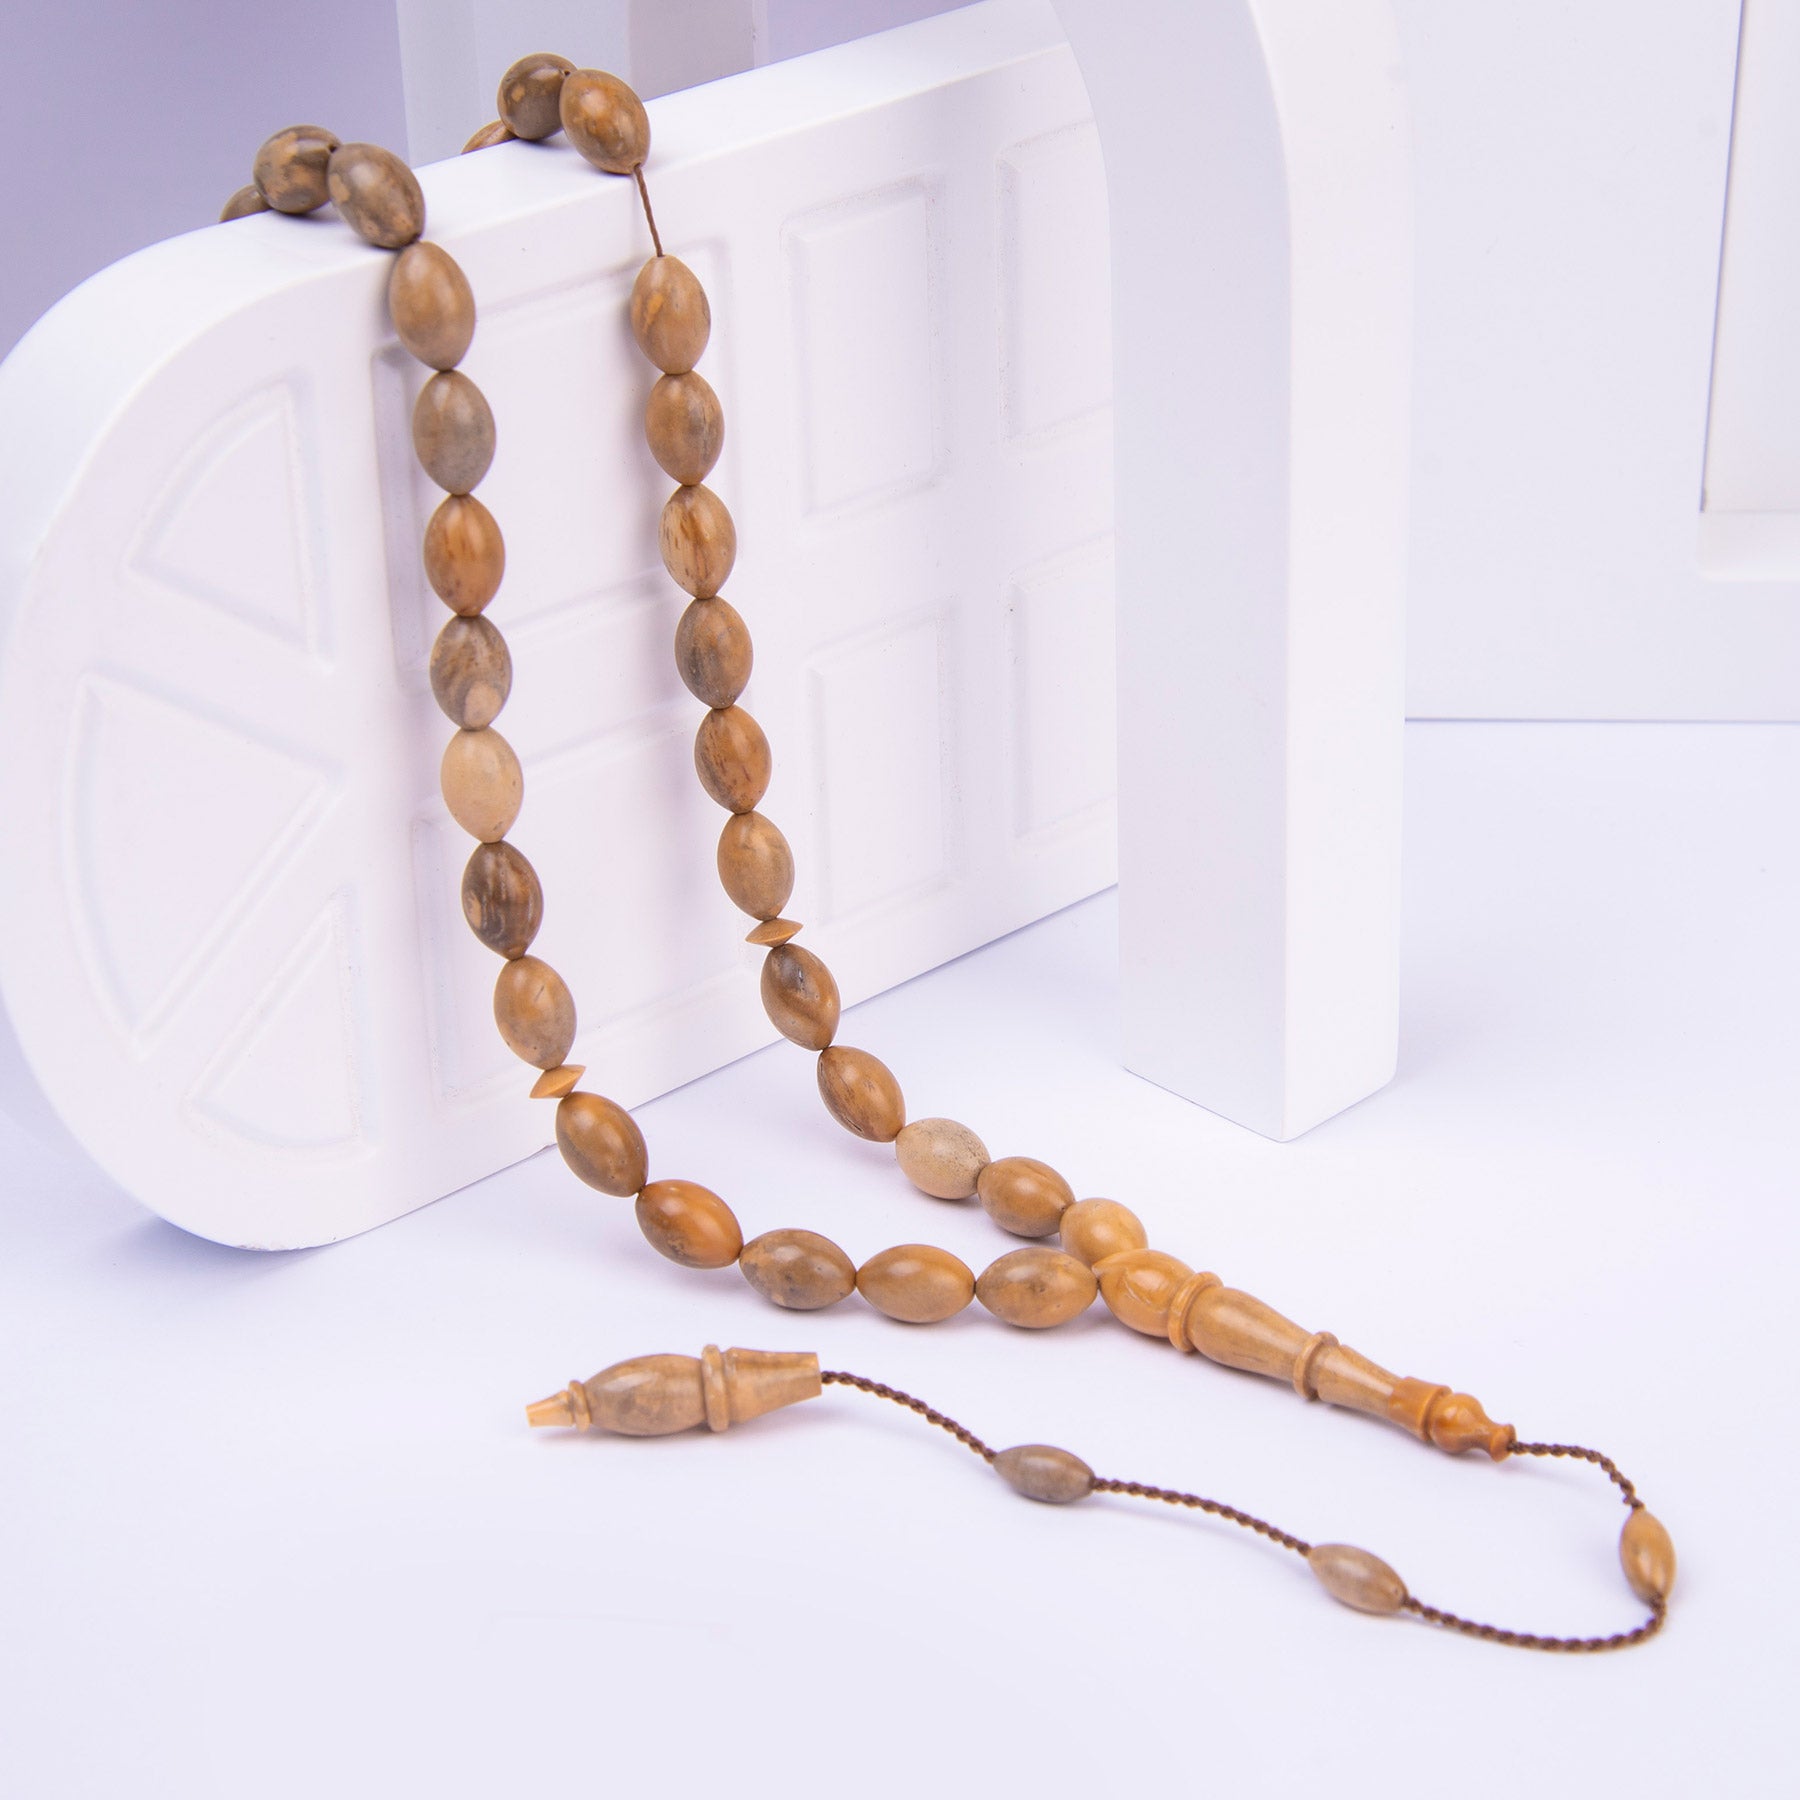 Ve Tesbih Systematic Solid Cut Green Rosewood Rosary 1